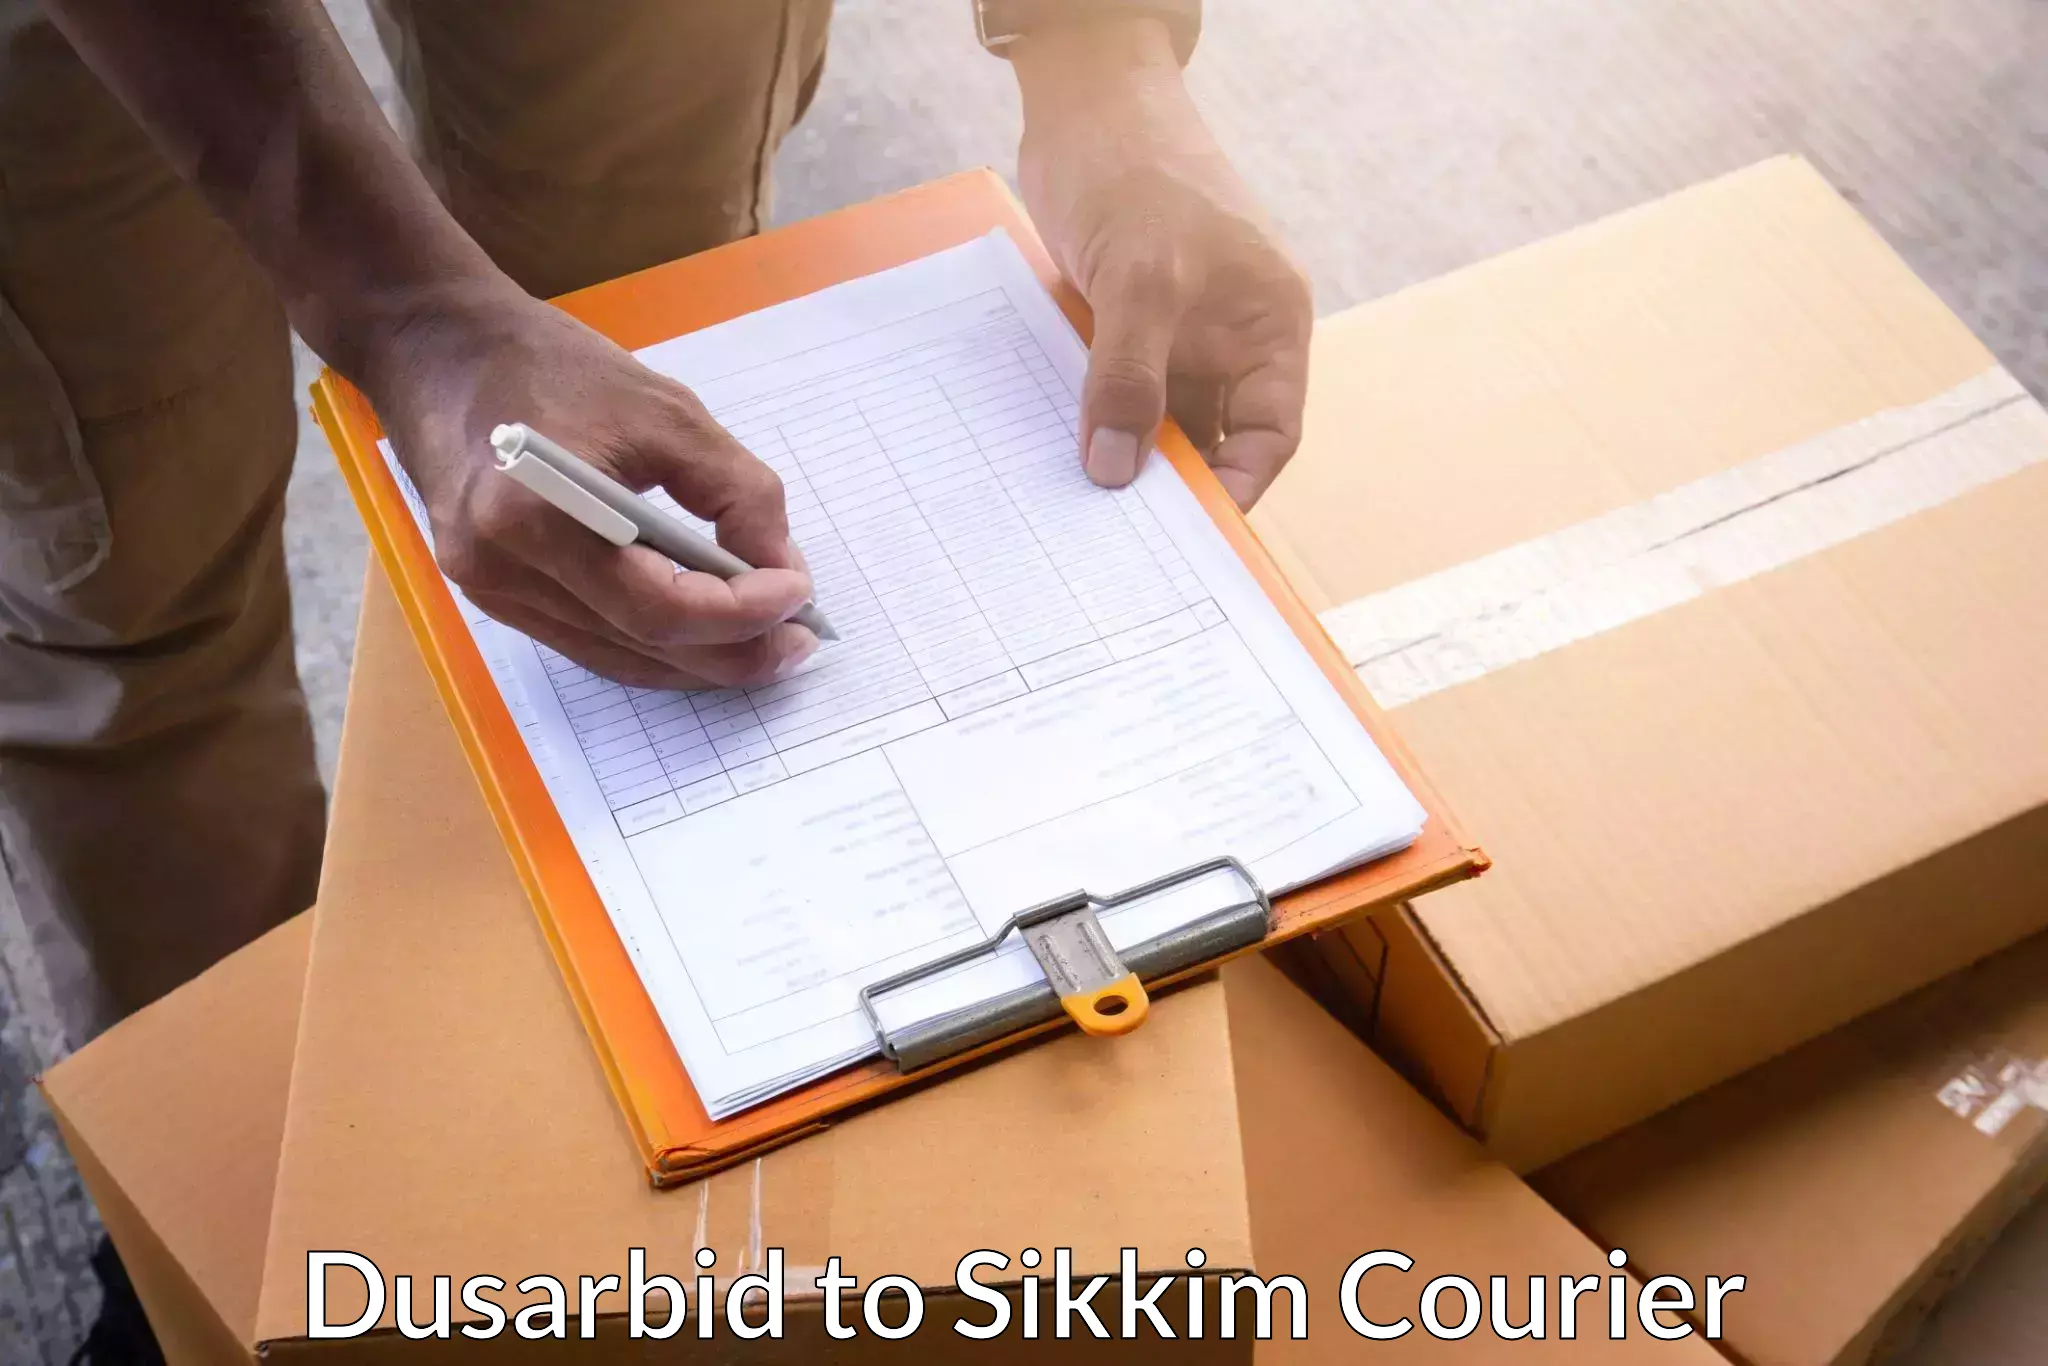 Full-service courier options Dusarbid to Mangan